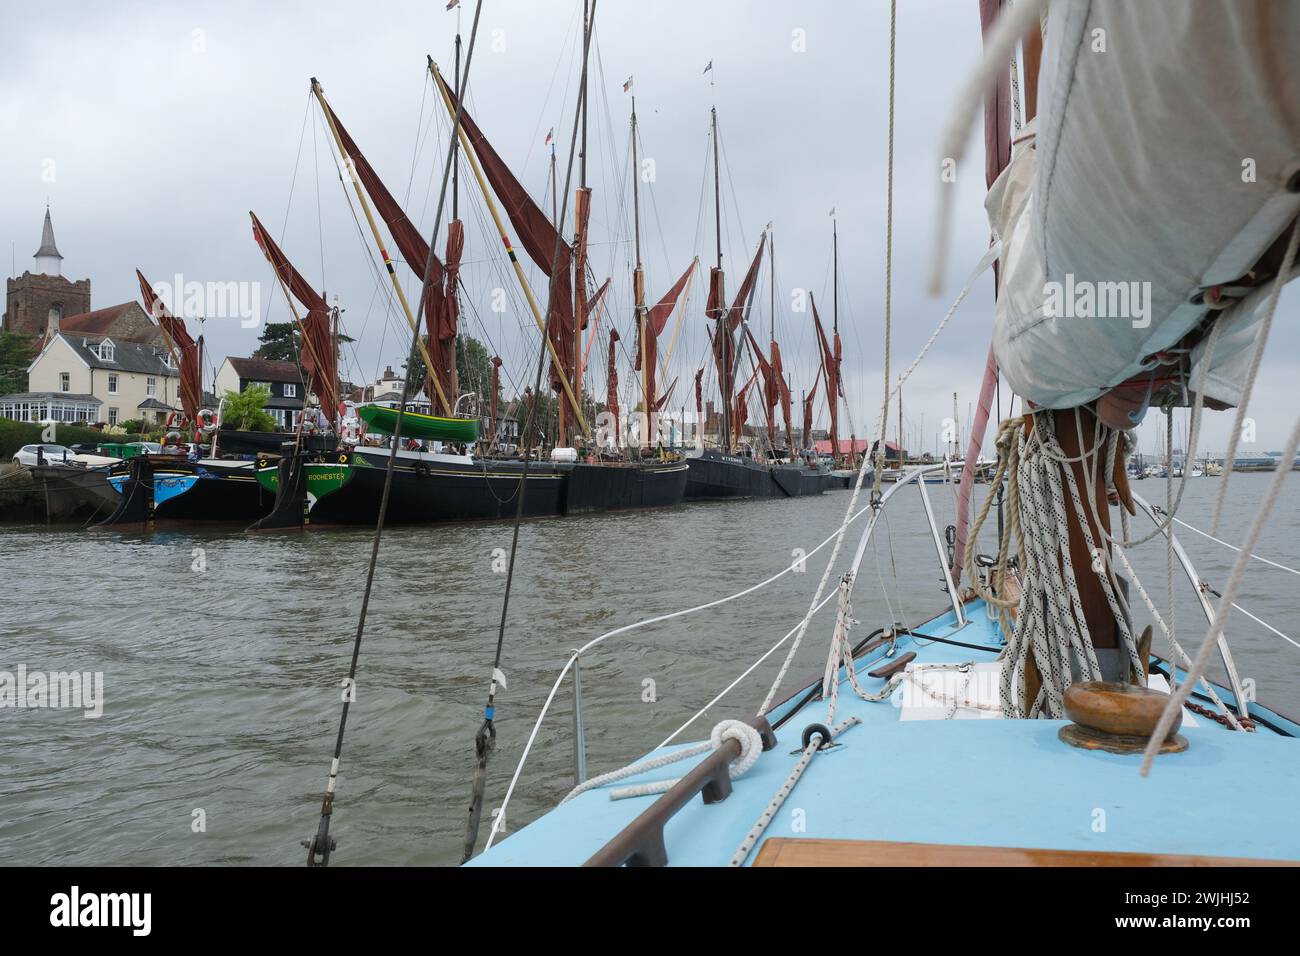 Thames barges moored at Maldon in Essex as seen from a sailing boat on the River Blackwater, Essex, UK Stock Photo